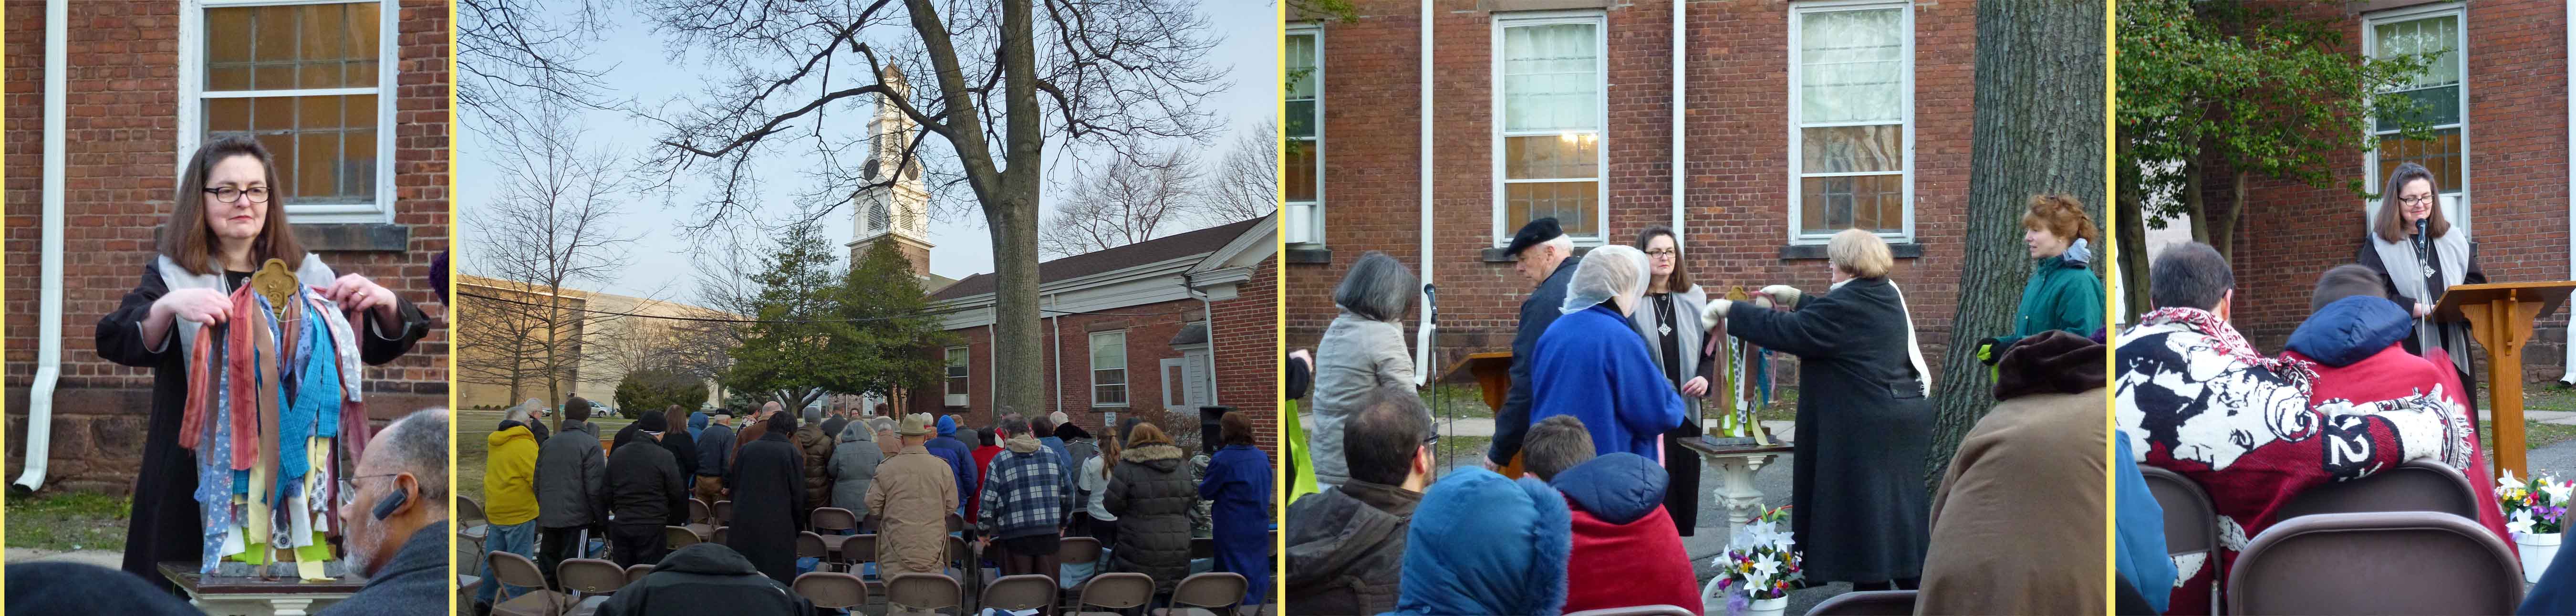 Easter Sunrise Service at the Bloomfield Presbyterian Church on the Green